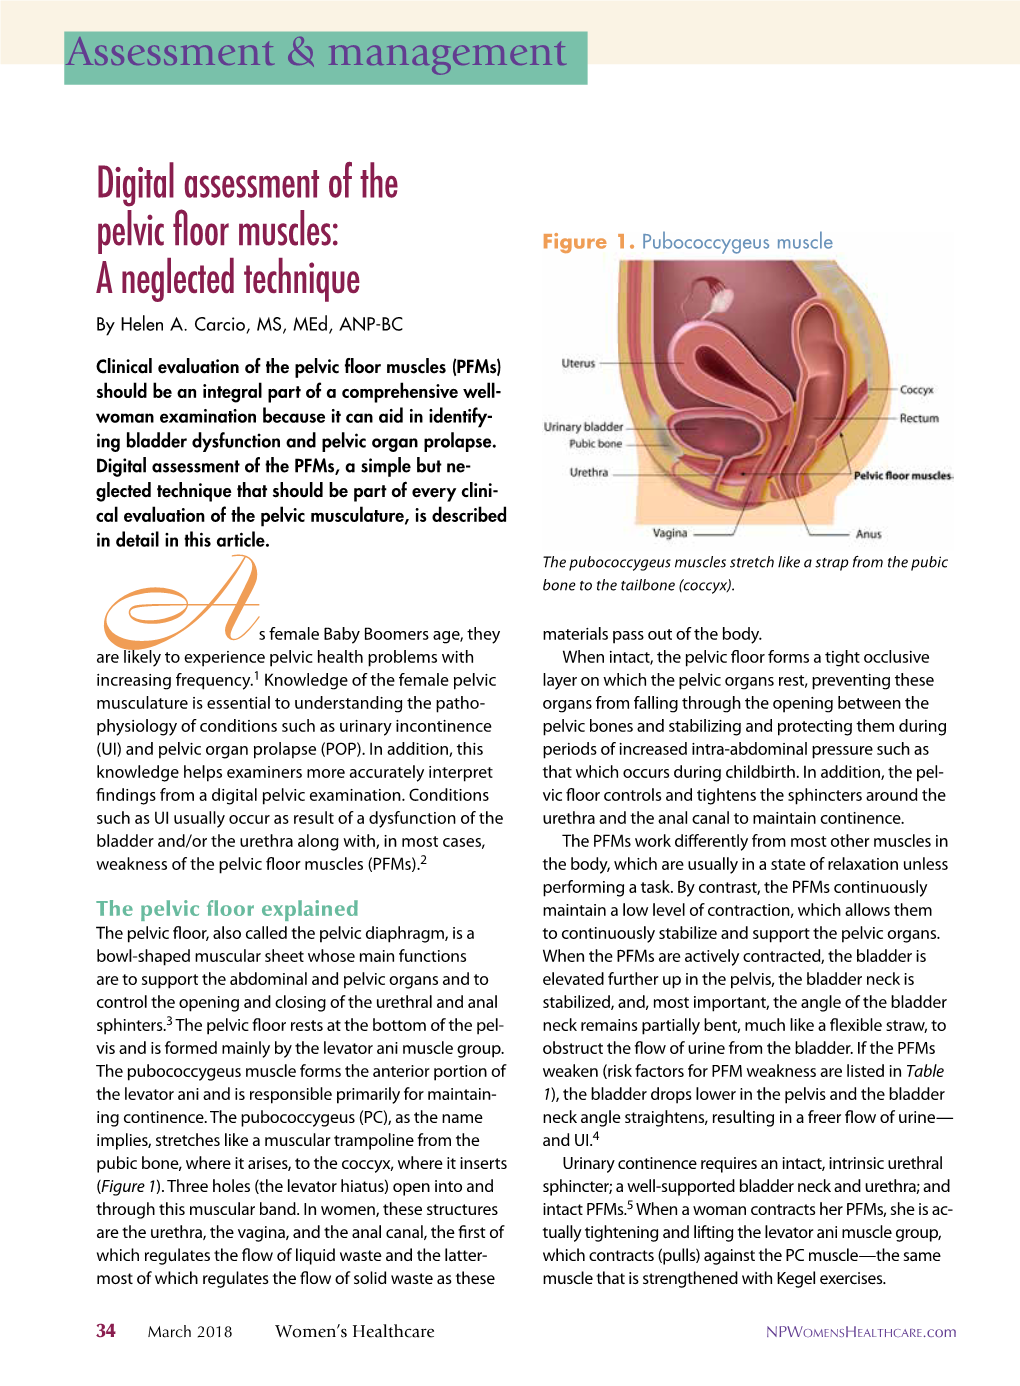 Digital Assessment of the Pelvic Floor Muscles: a Neglected Technique